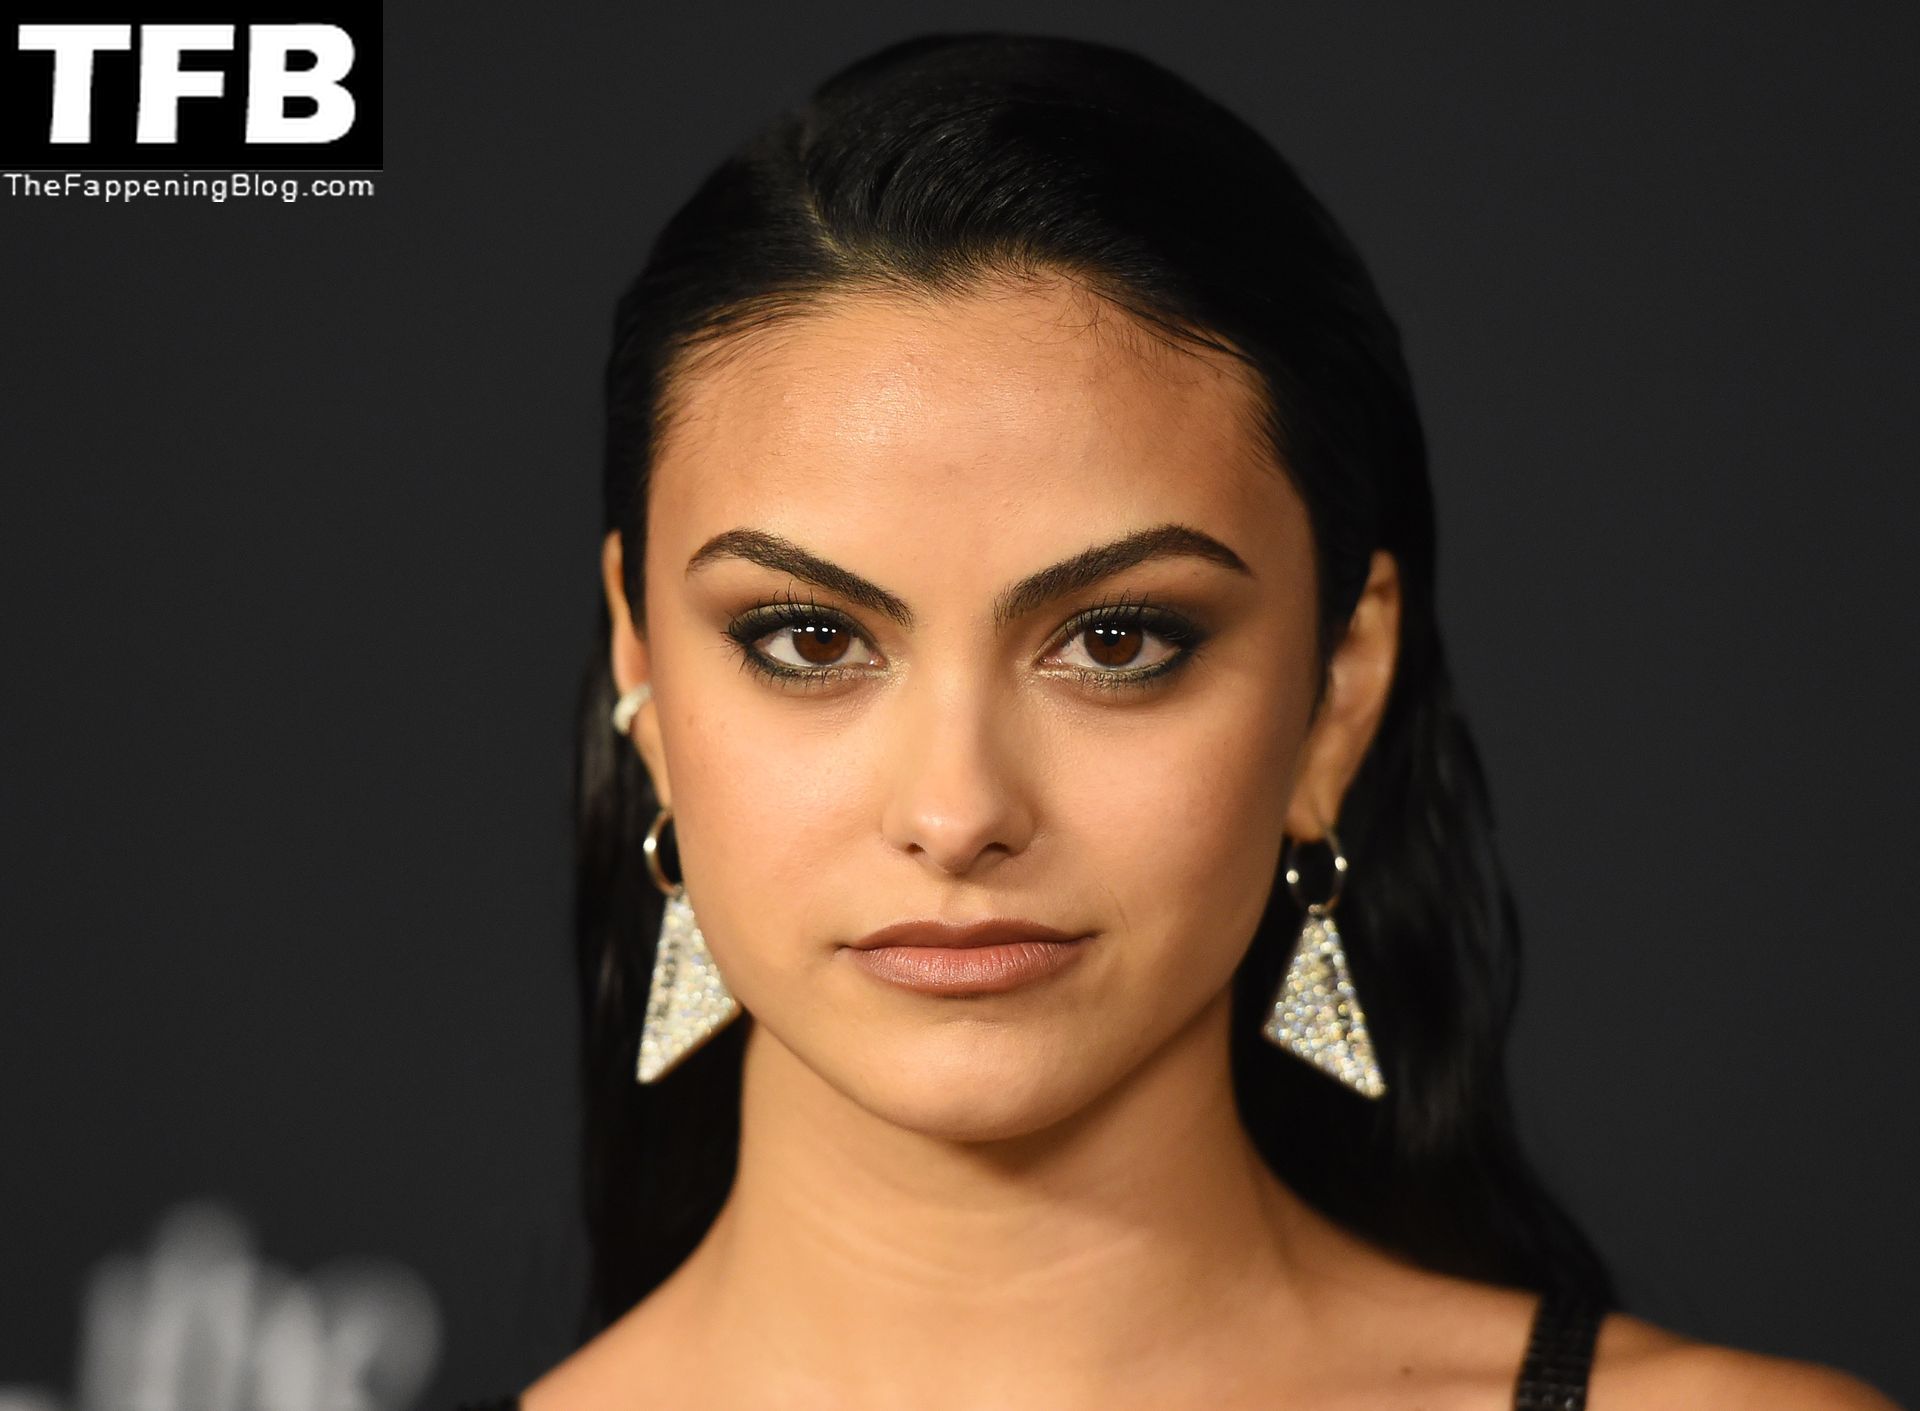 Camila-Mendes-See-Through-Tits-The-Fappening-Blog-64.jpg